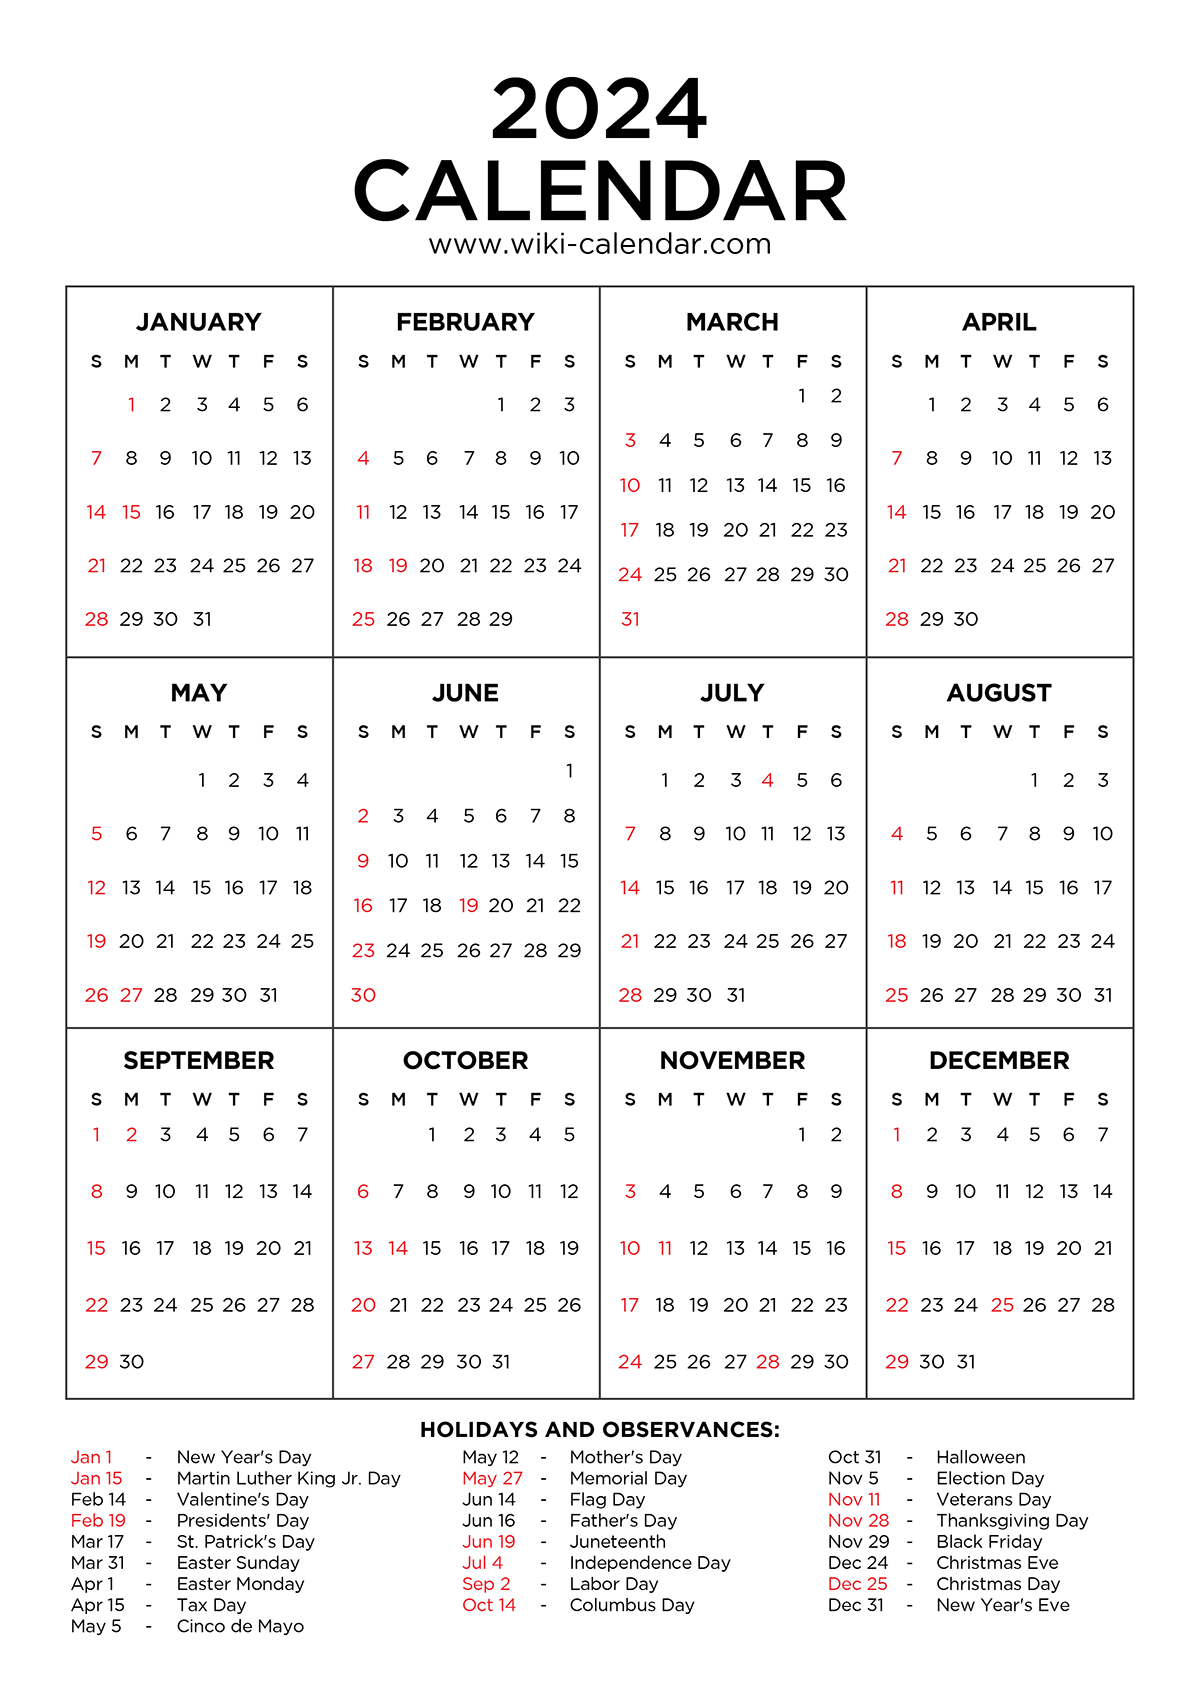 Year 2024 Calendar Printable With Holidays - Wiki Calendar pertaining to Free Printable Calendar 2024 Date And Time